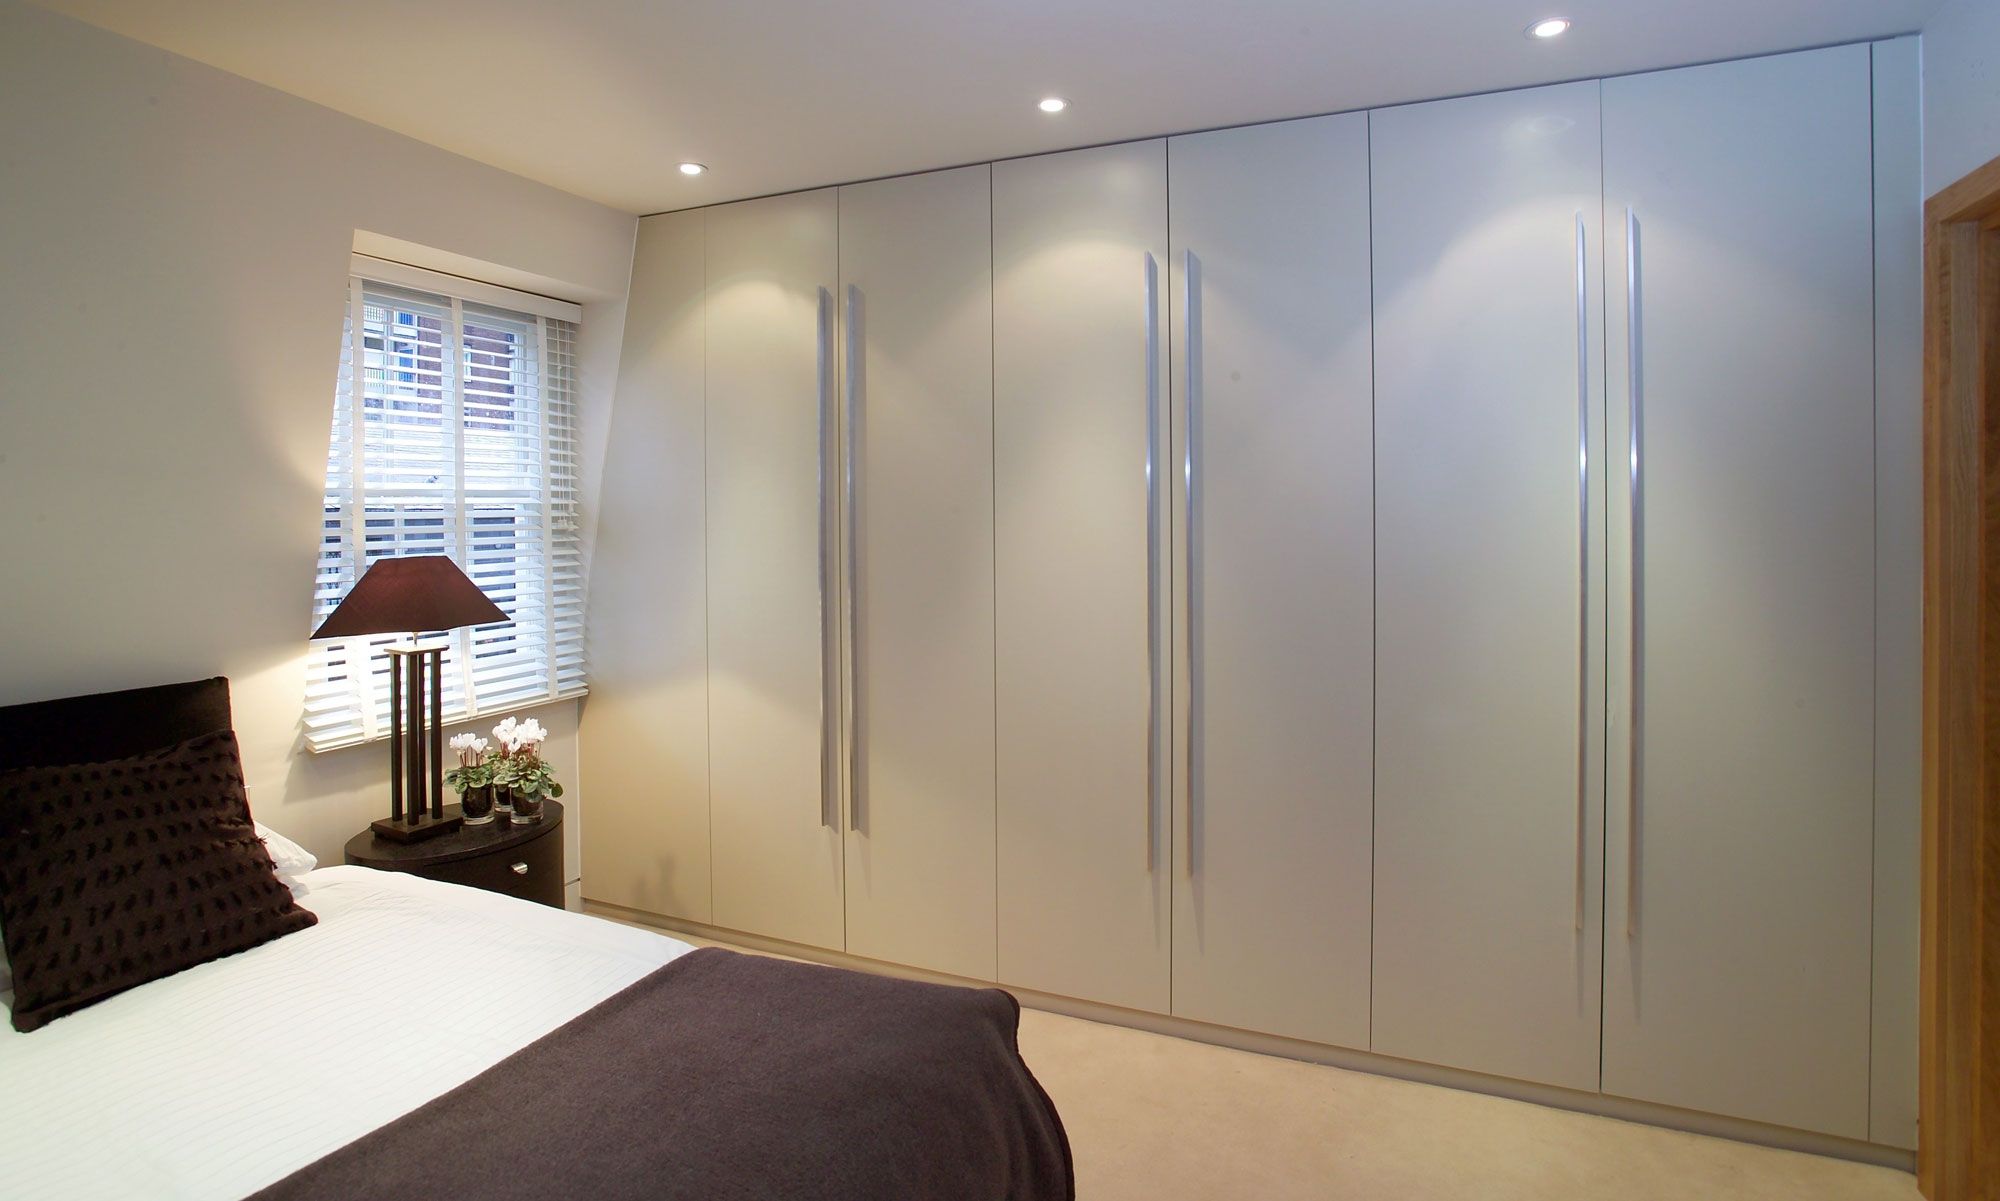 Bedroom Fitted Wardrobe Designs Bedroom Wardrobe Designs Brava Pertaining To Fitted Cabinets (View 2 of 15)